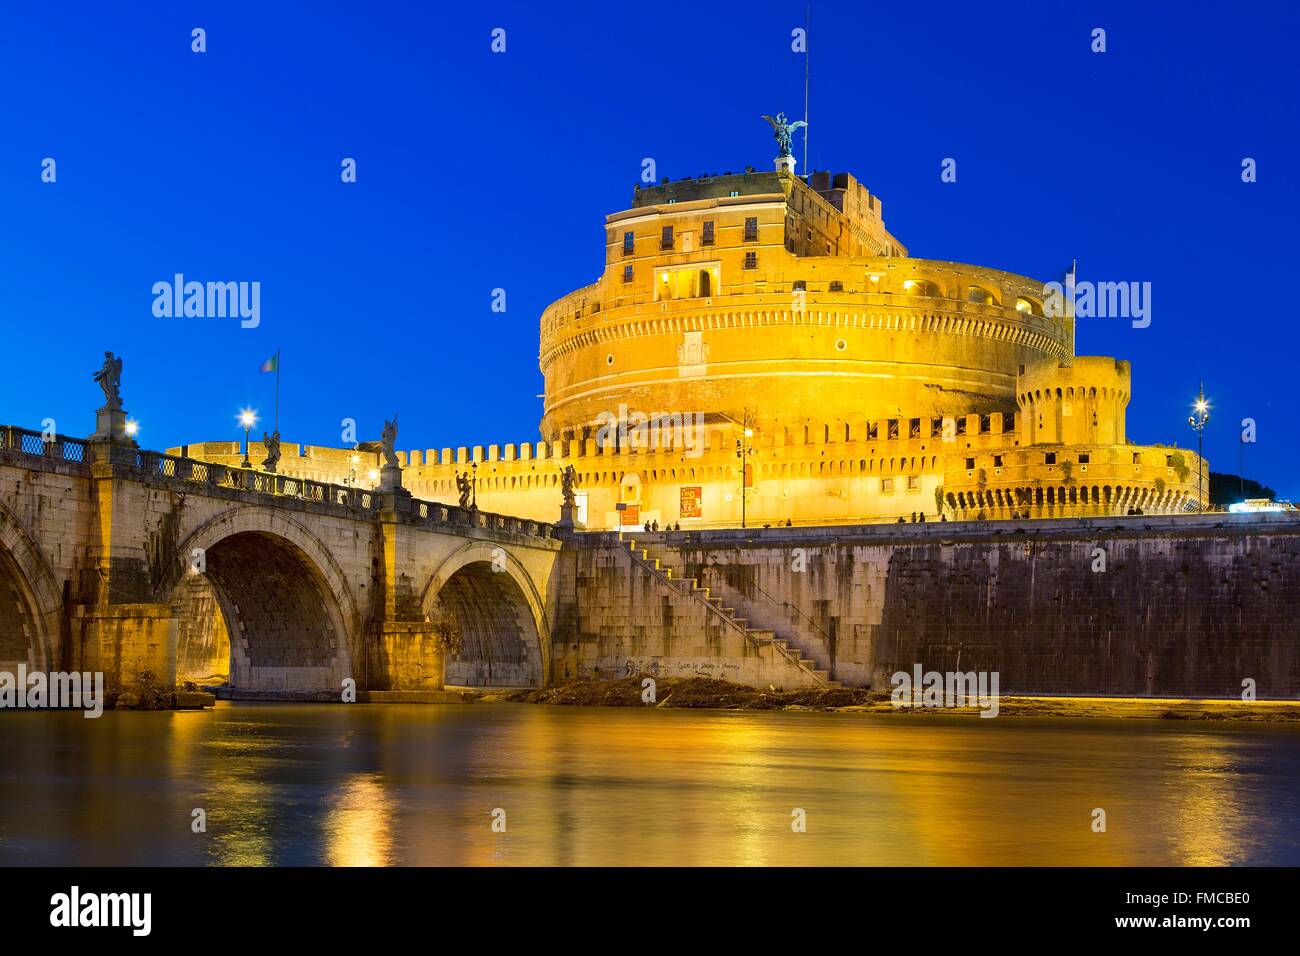 Italy, Lazio, Rome, historical center listed as World Heritage by UNESCO, Castel Sant'Angelo, The Mausoleum of Hadrian Stock Photo